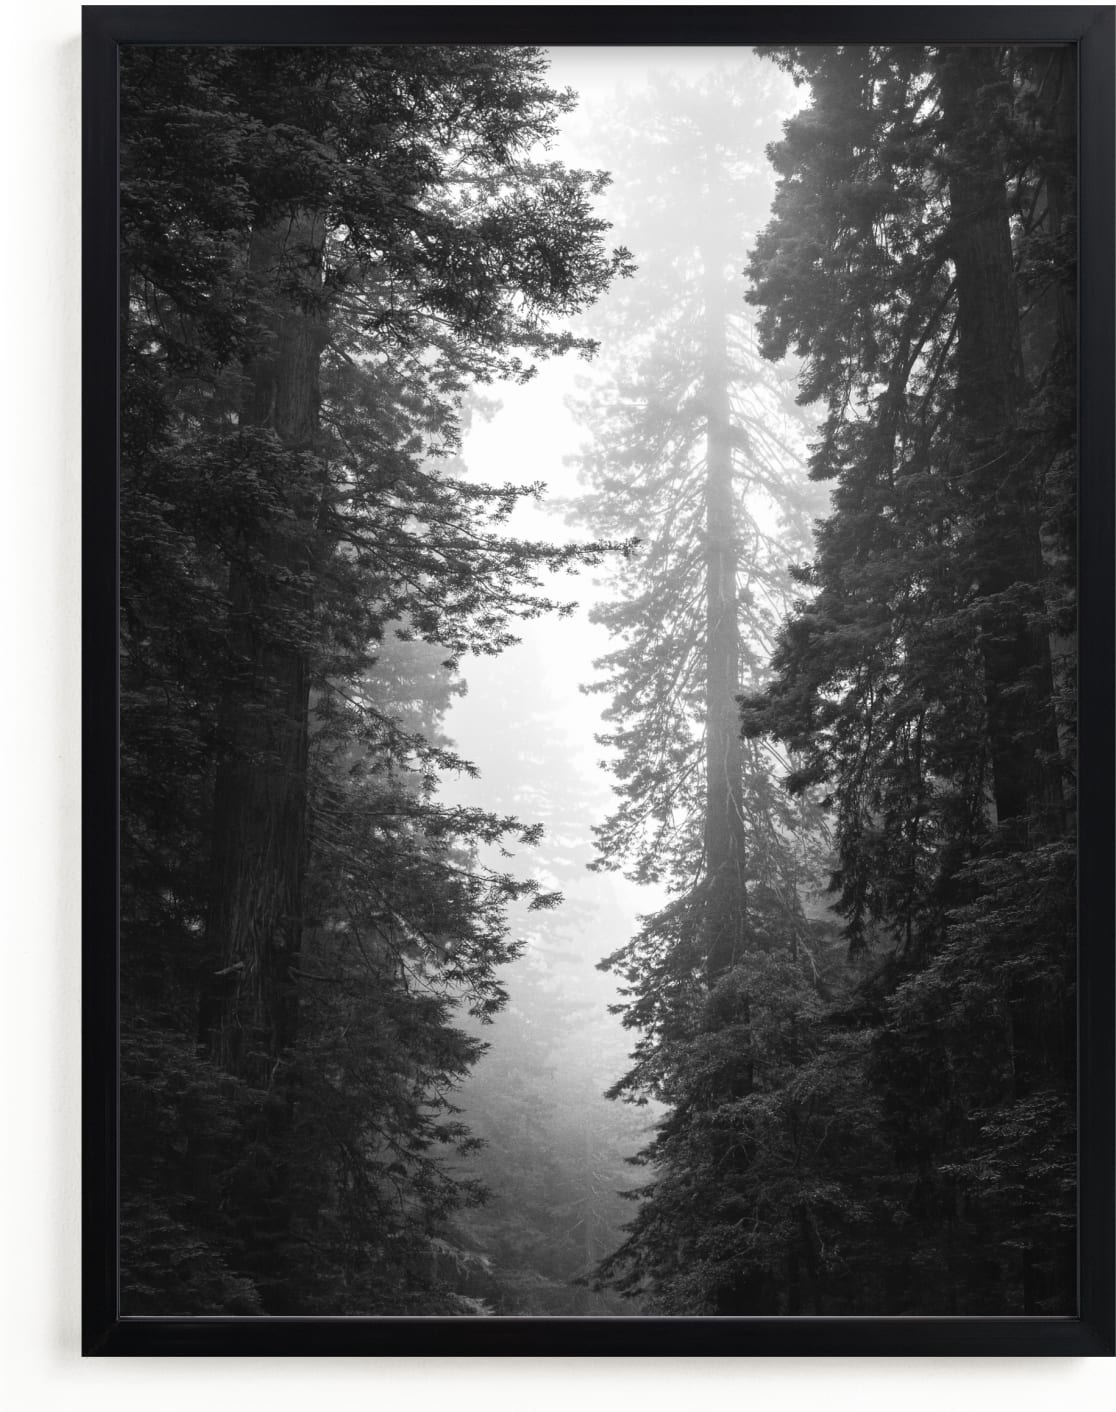 This is a black and white, white, black art by Kamala Nahas called Redwood Morning.